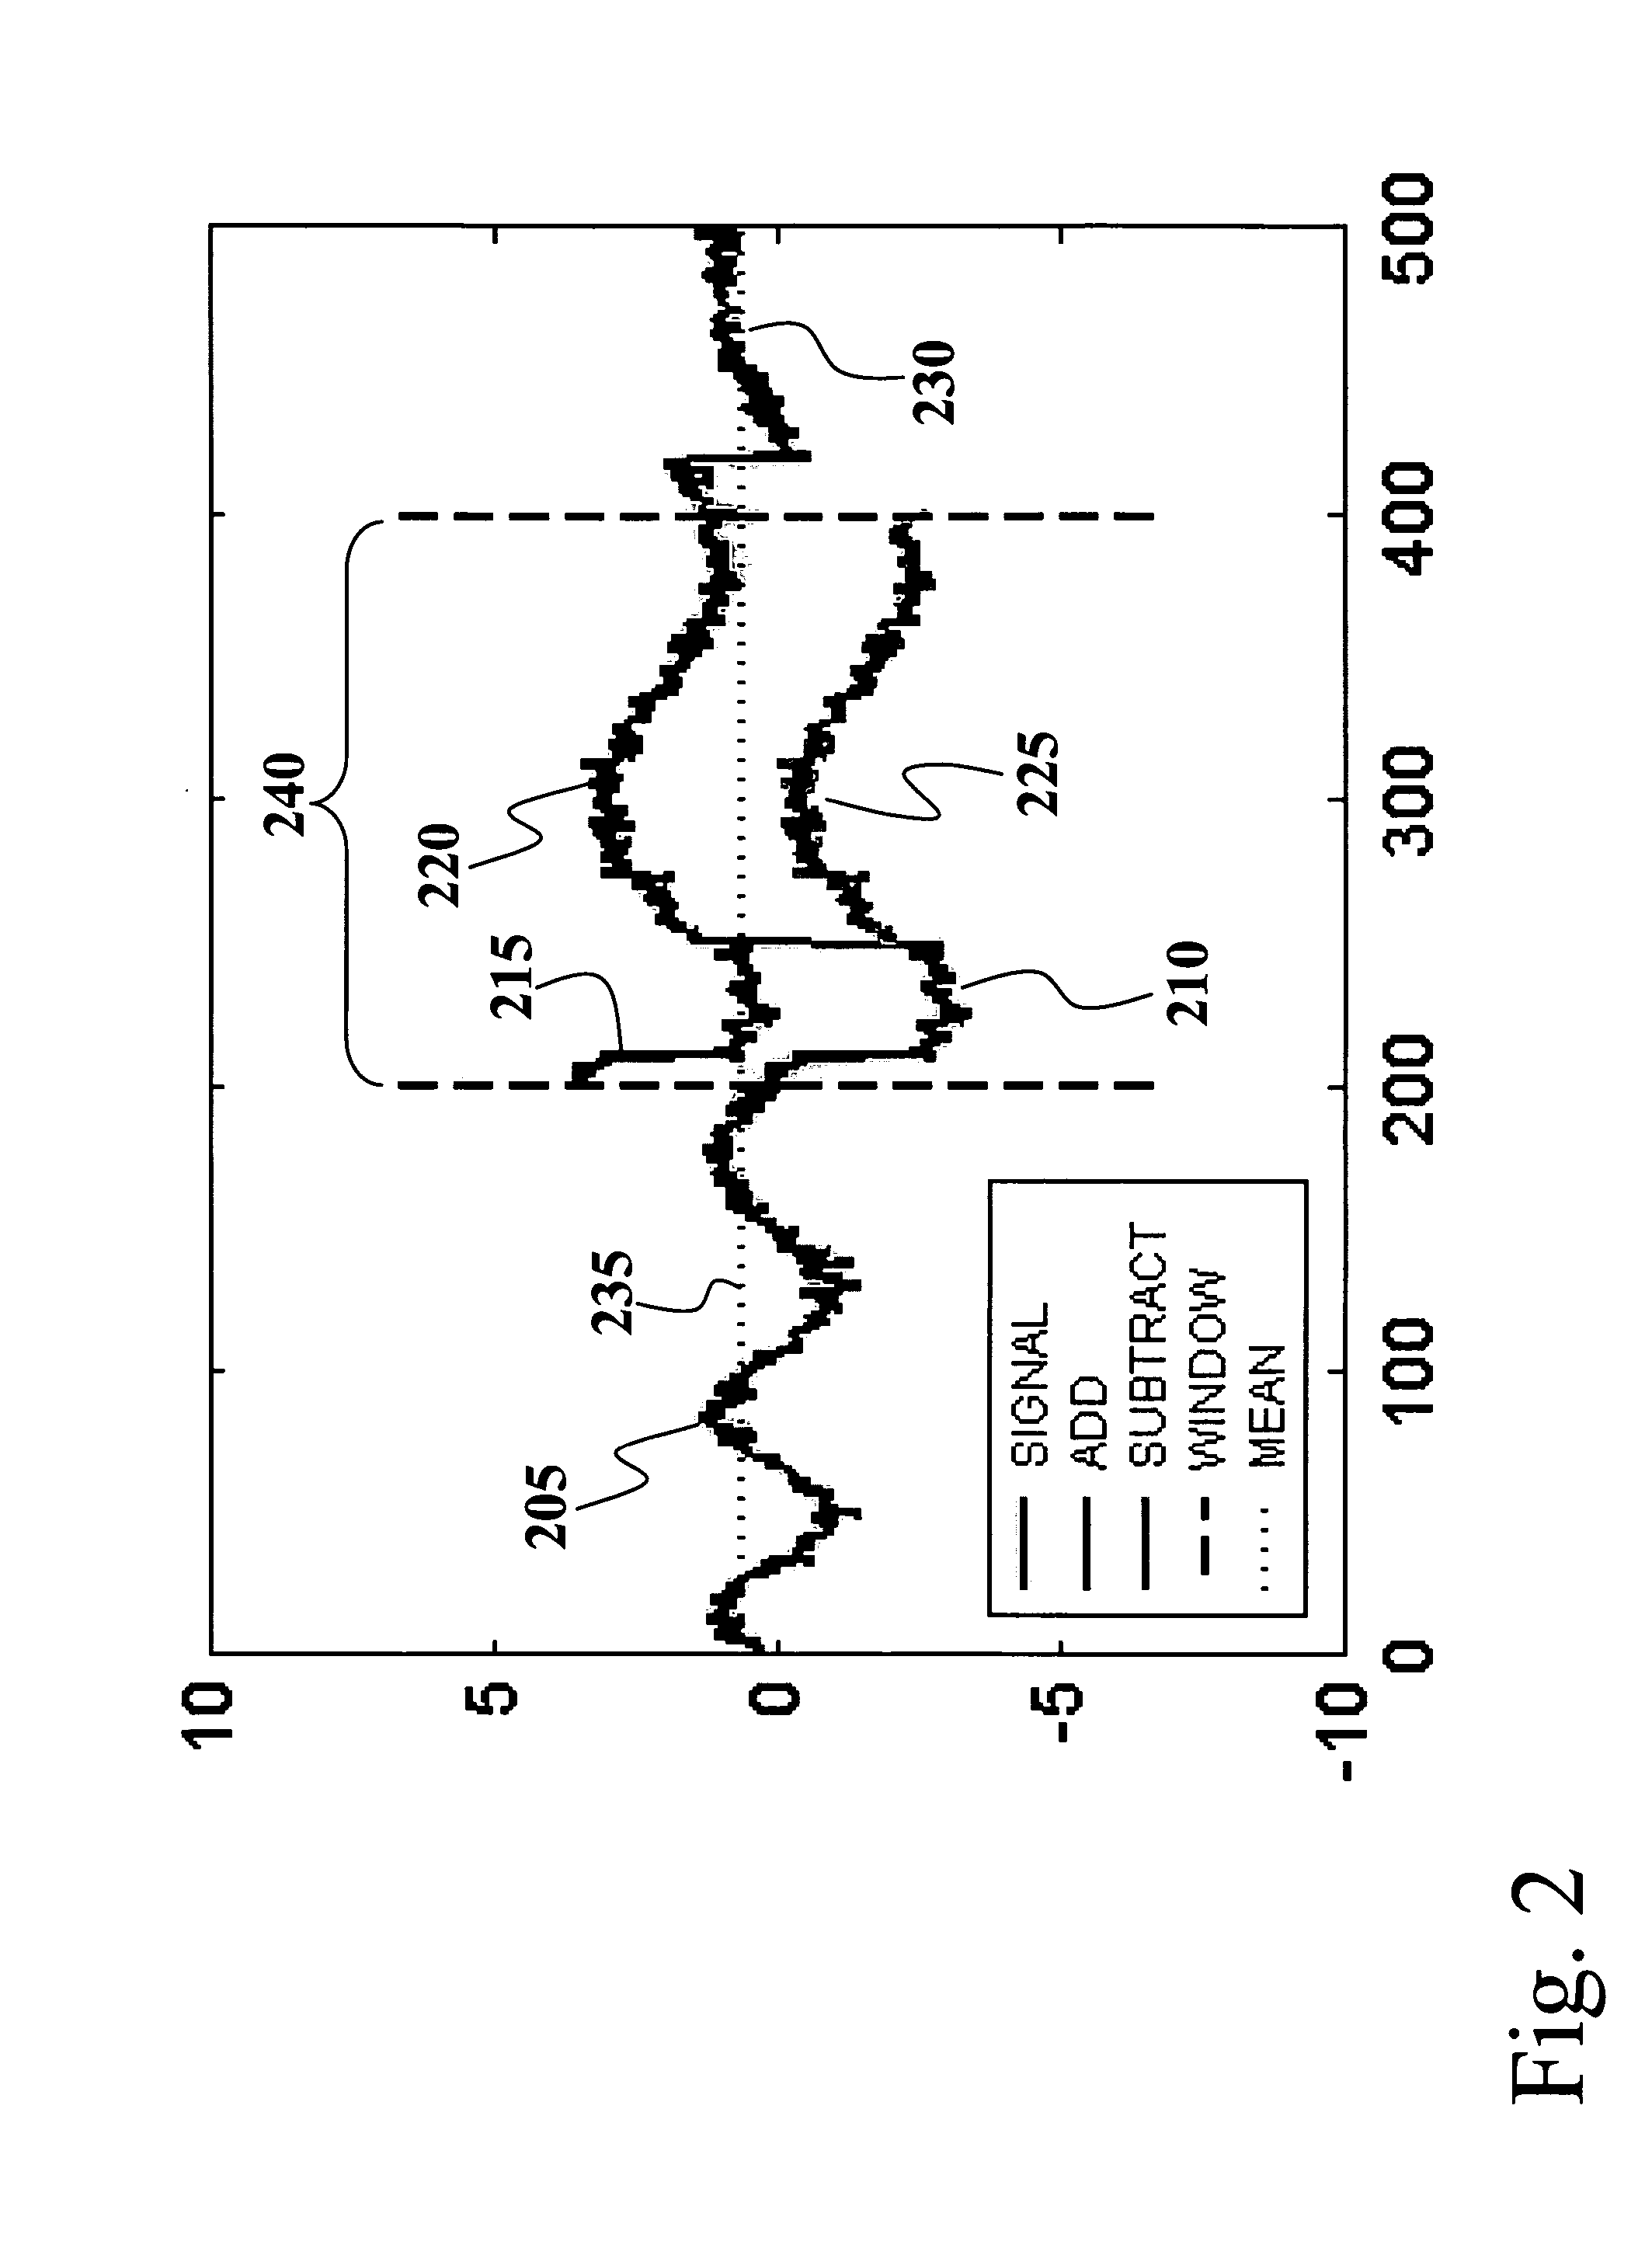 Automated model configuration and deployment system for equipment health monitoring